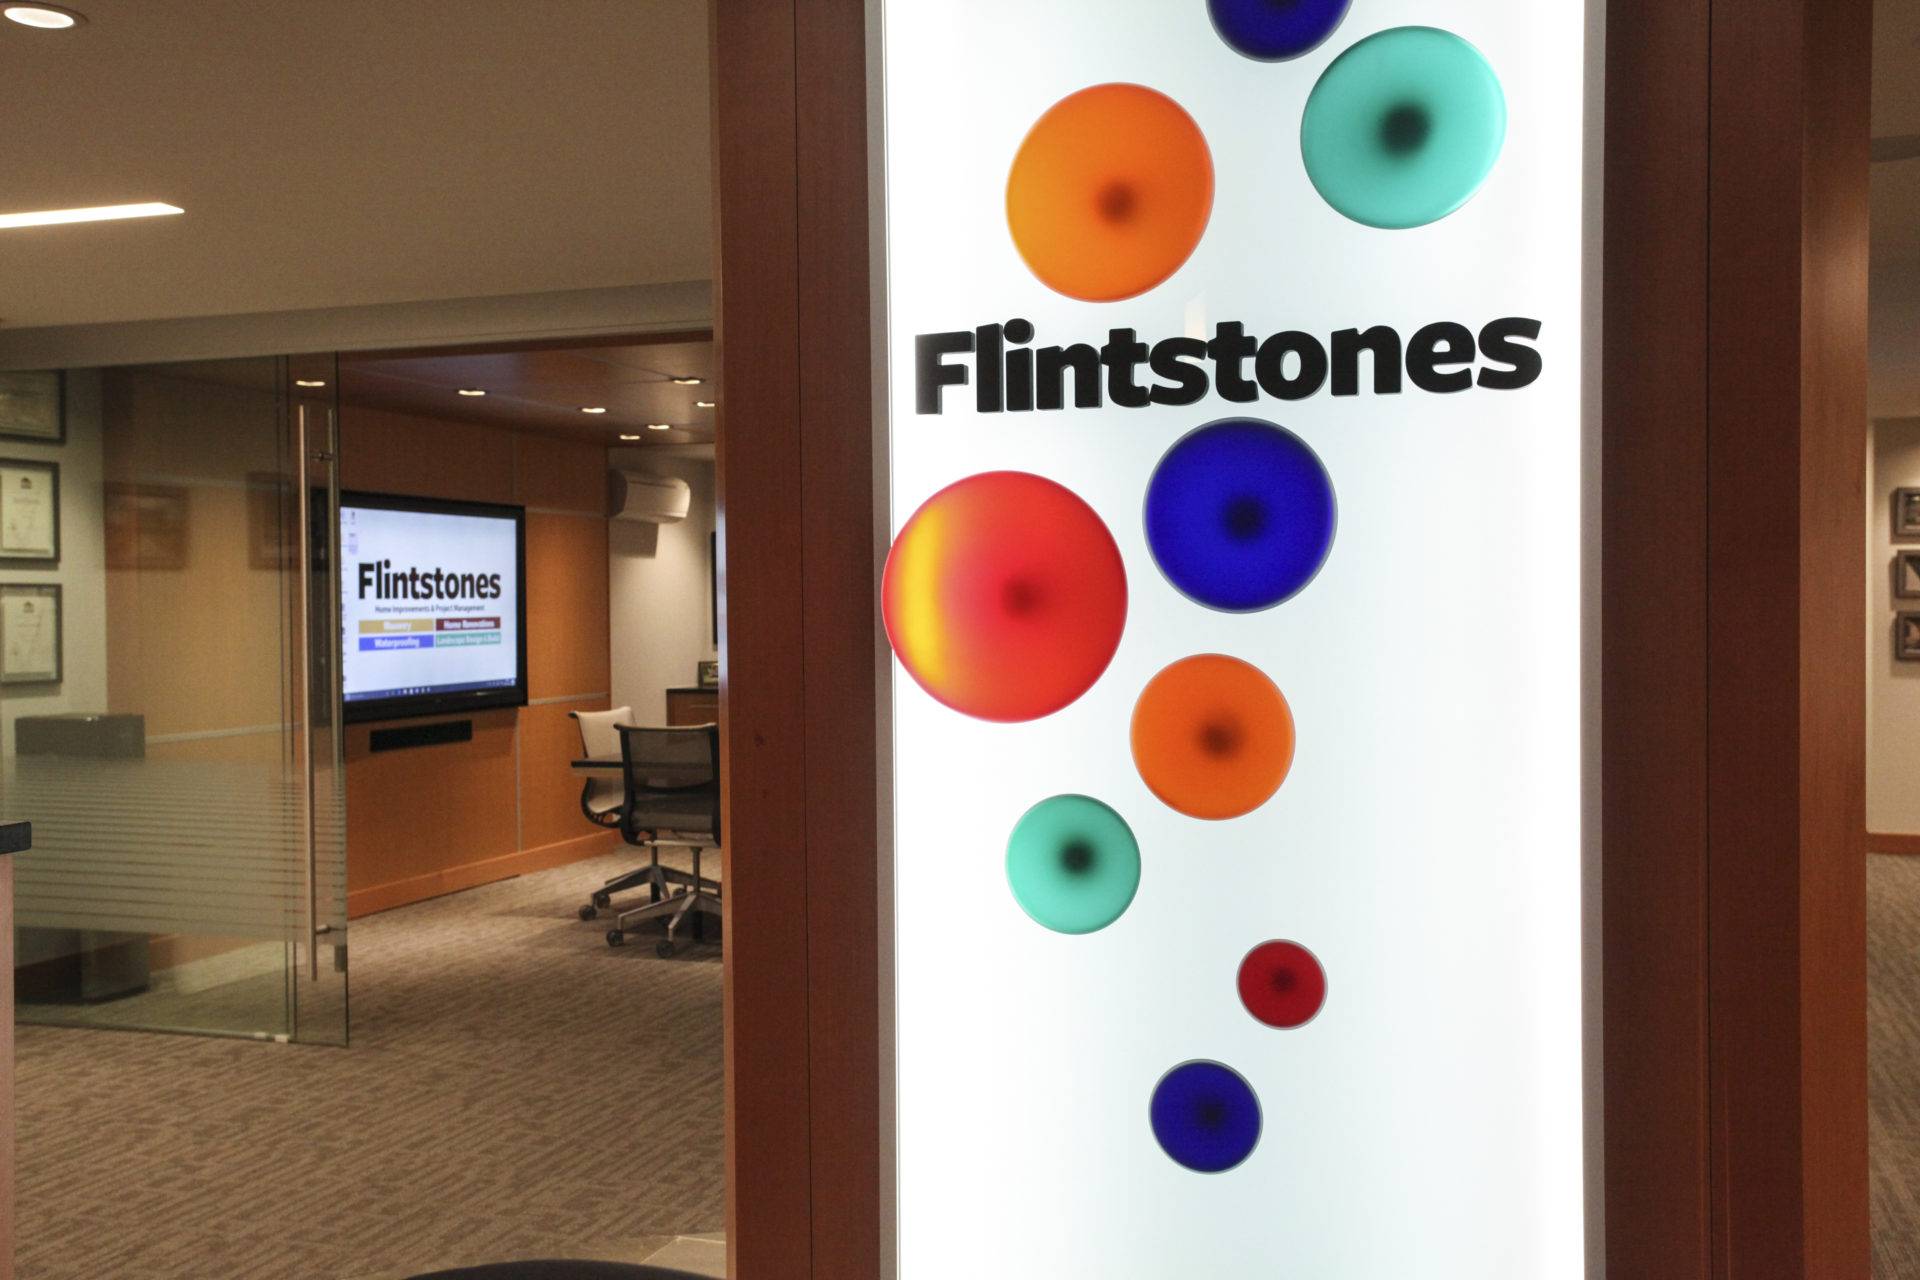 Office space with lit-up "Flintstones" sign and glass walls